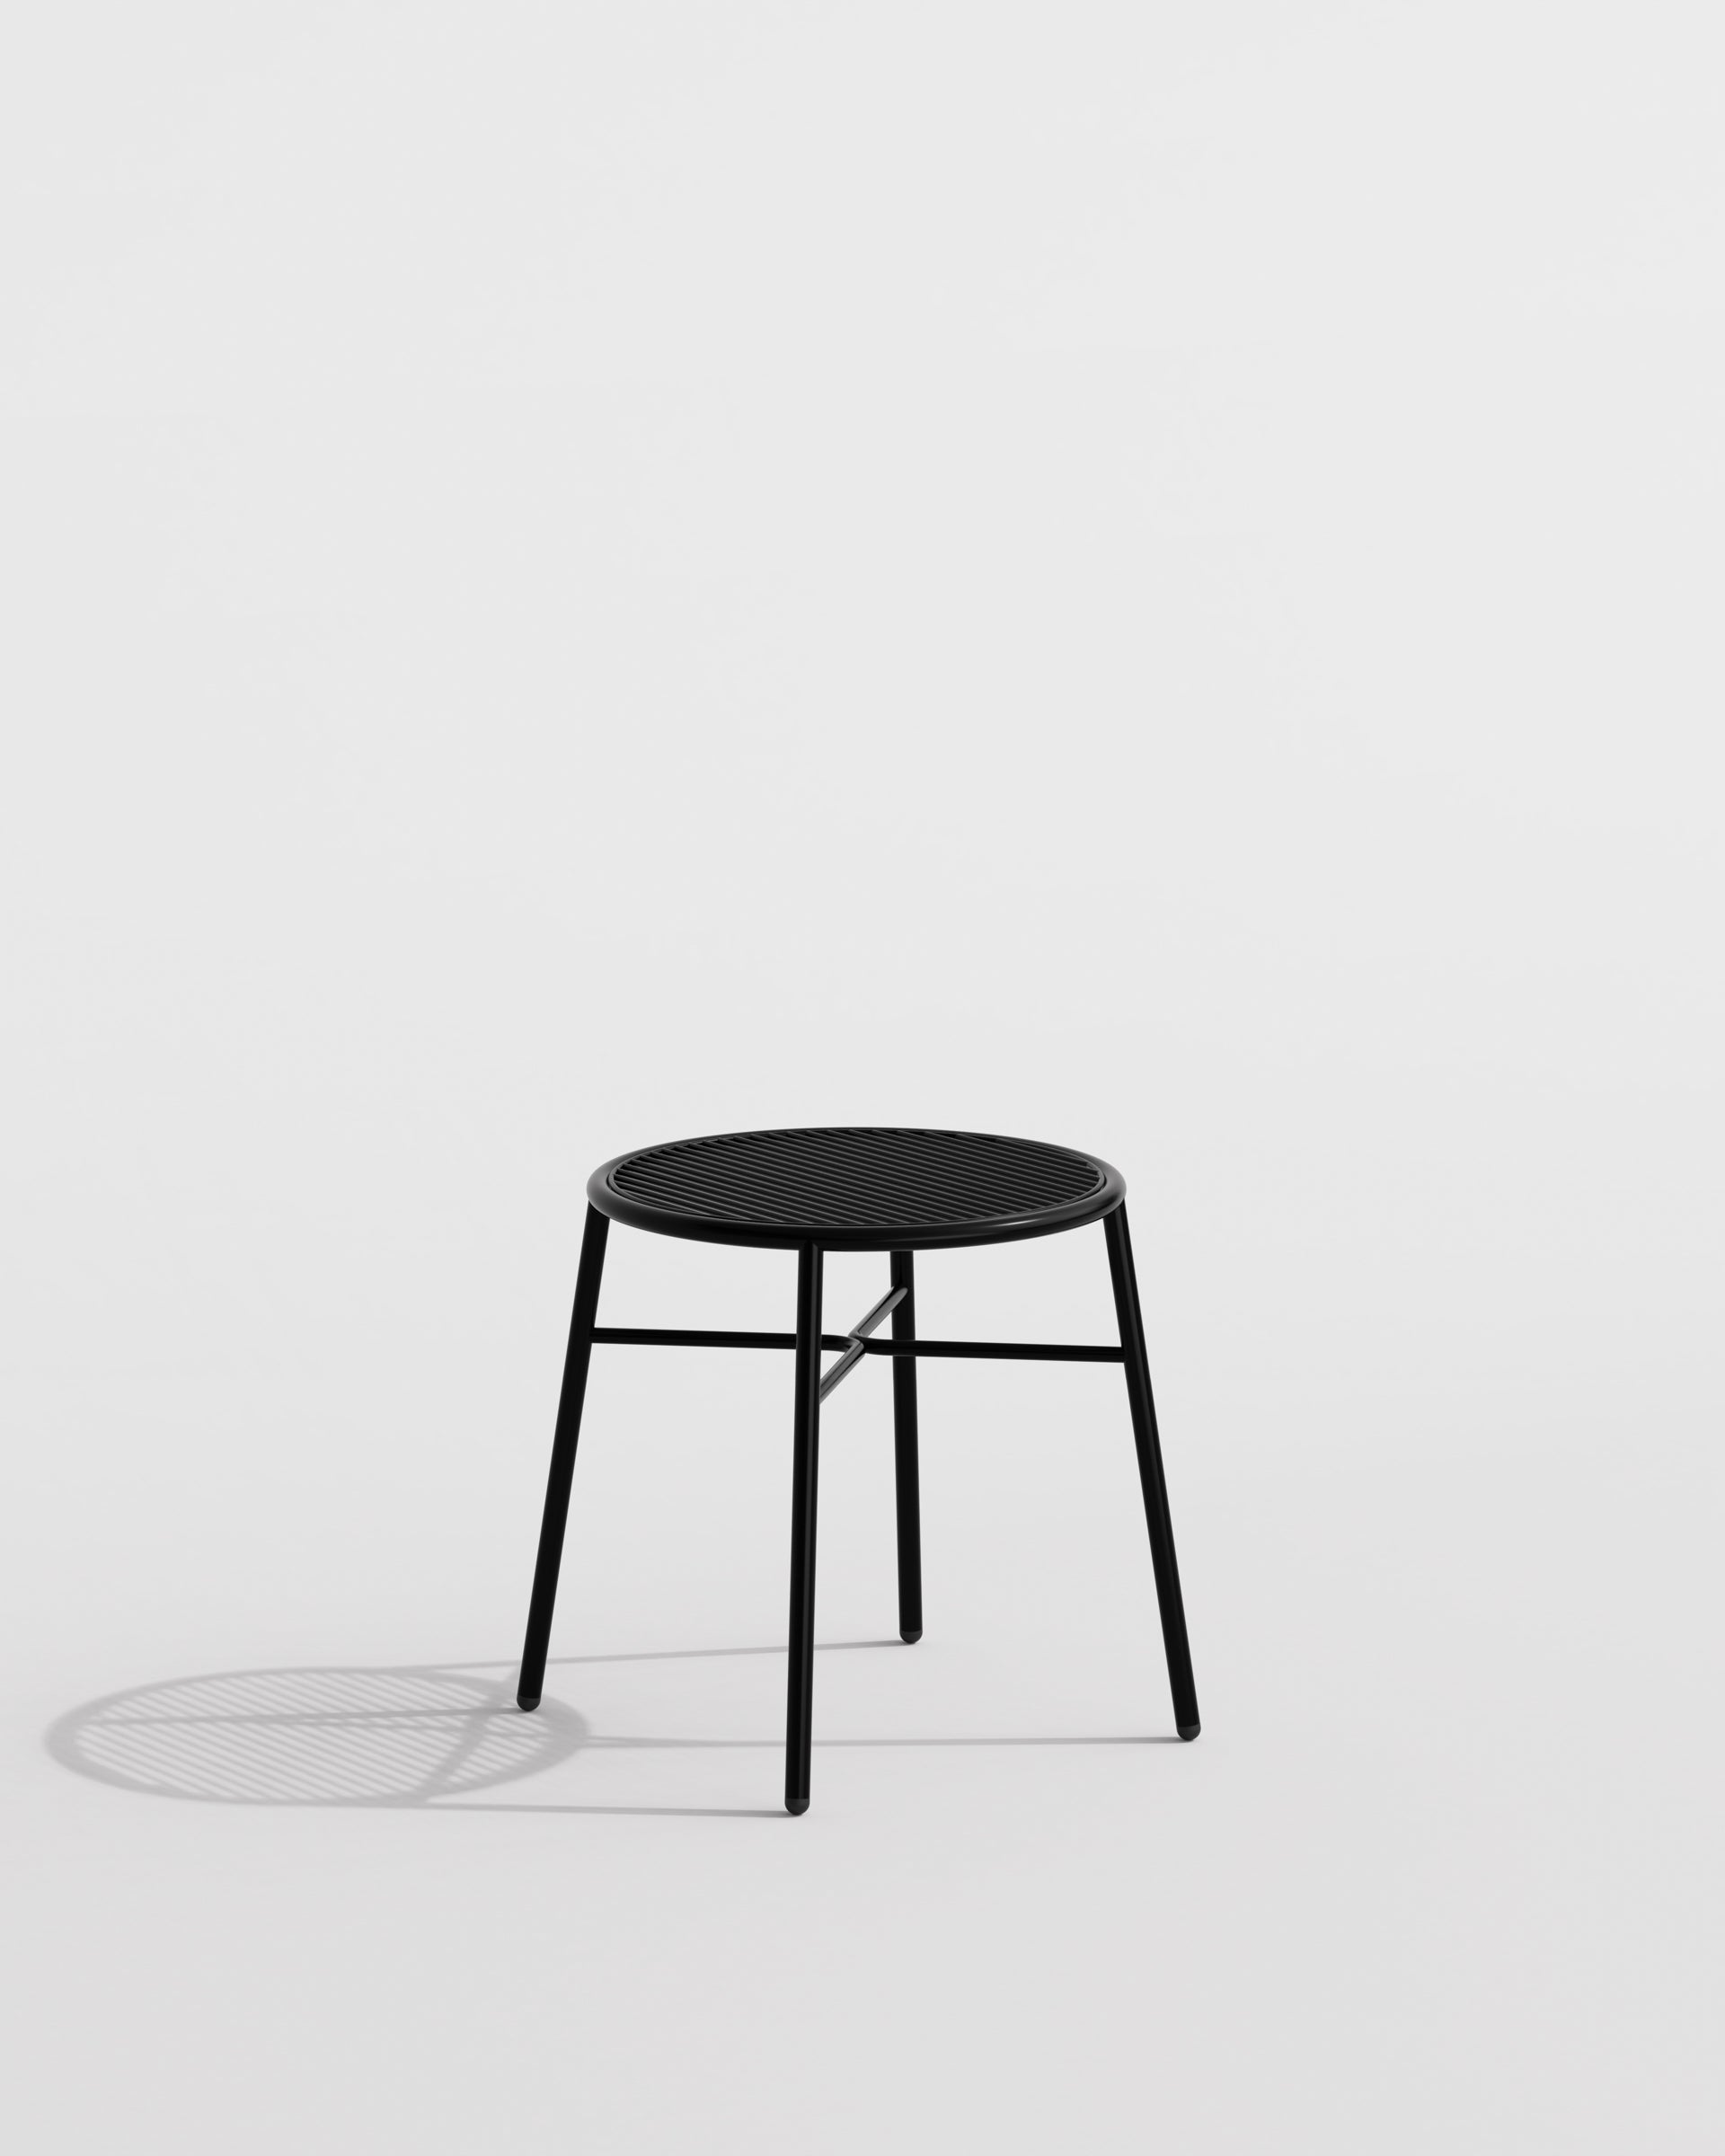 Piper Low Stool | Stackable Outdoor | Designed by GibsonKarlo | DesignByThem